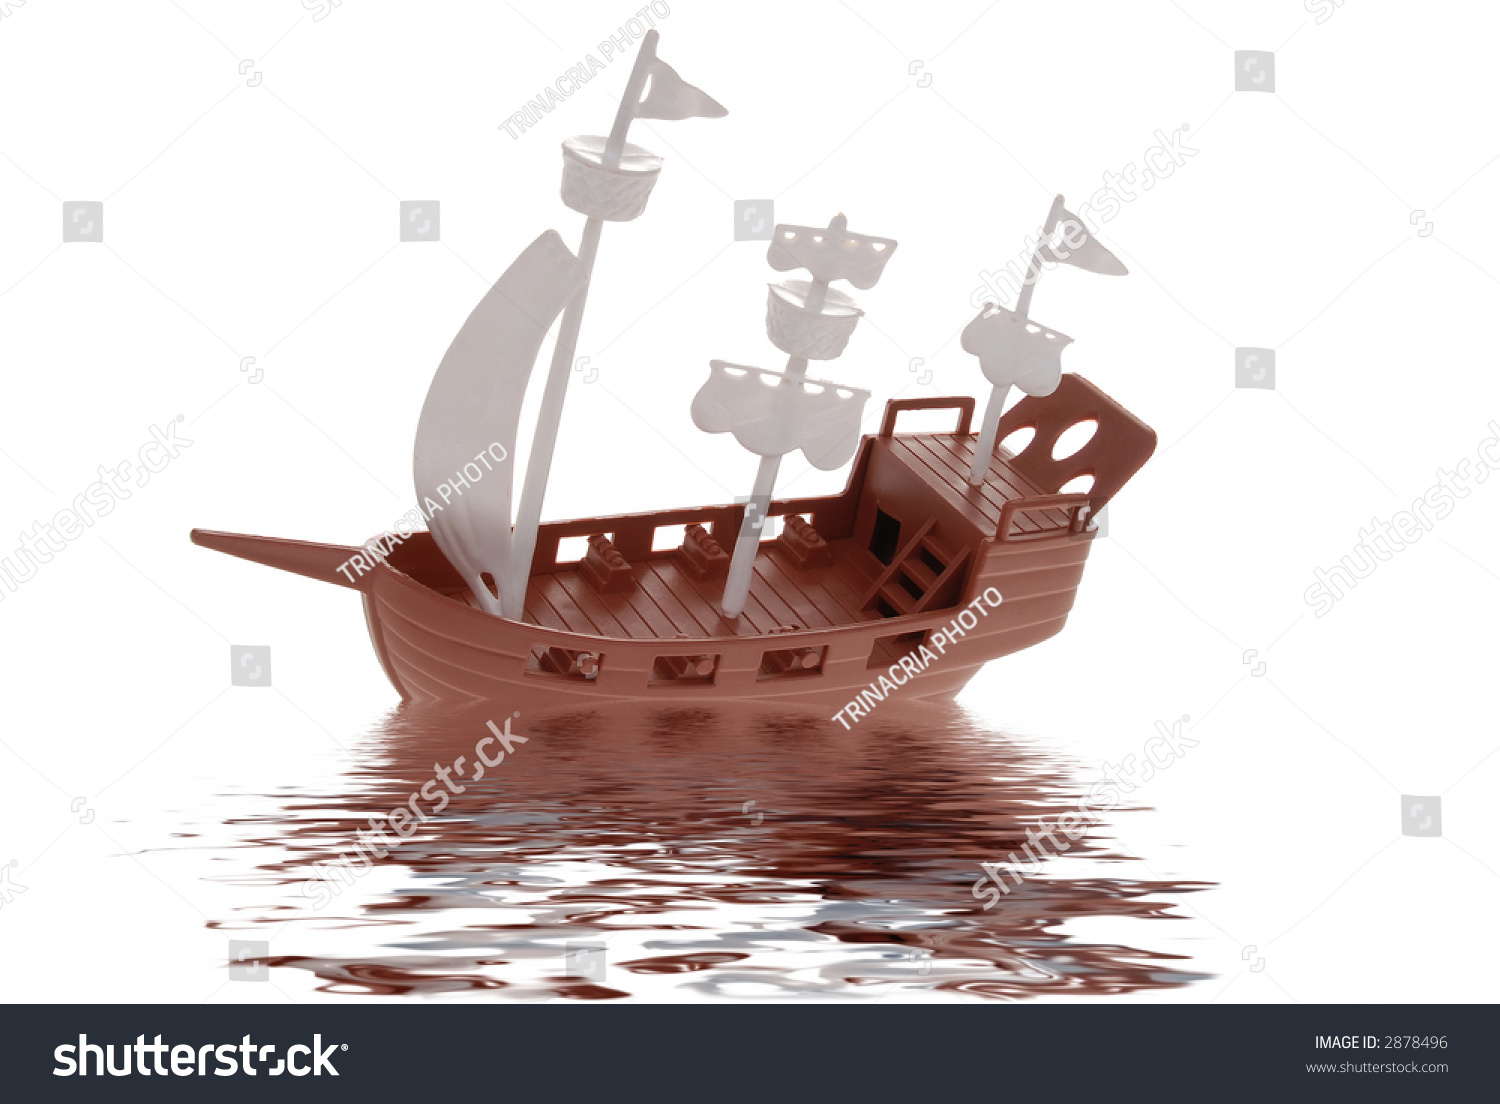 small toy pirate ship